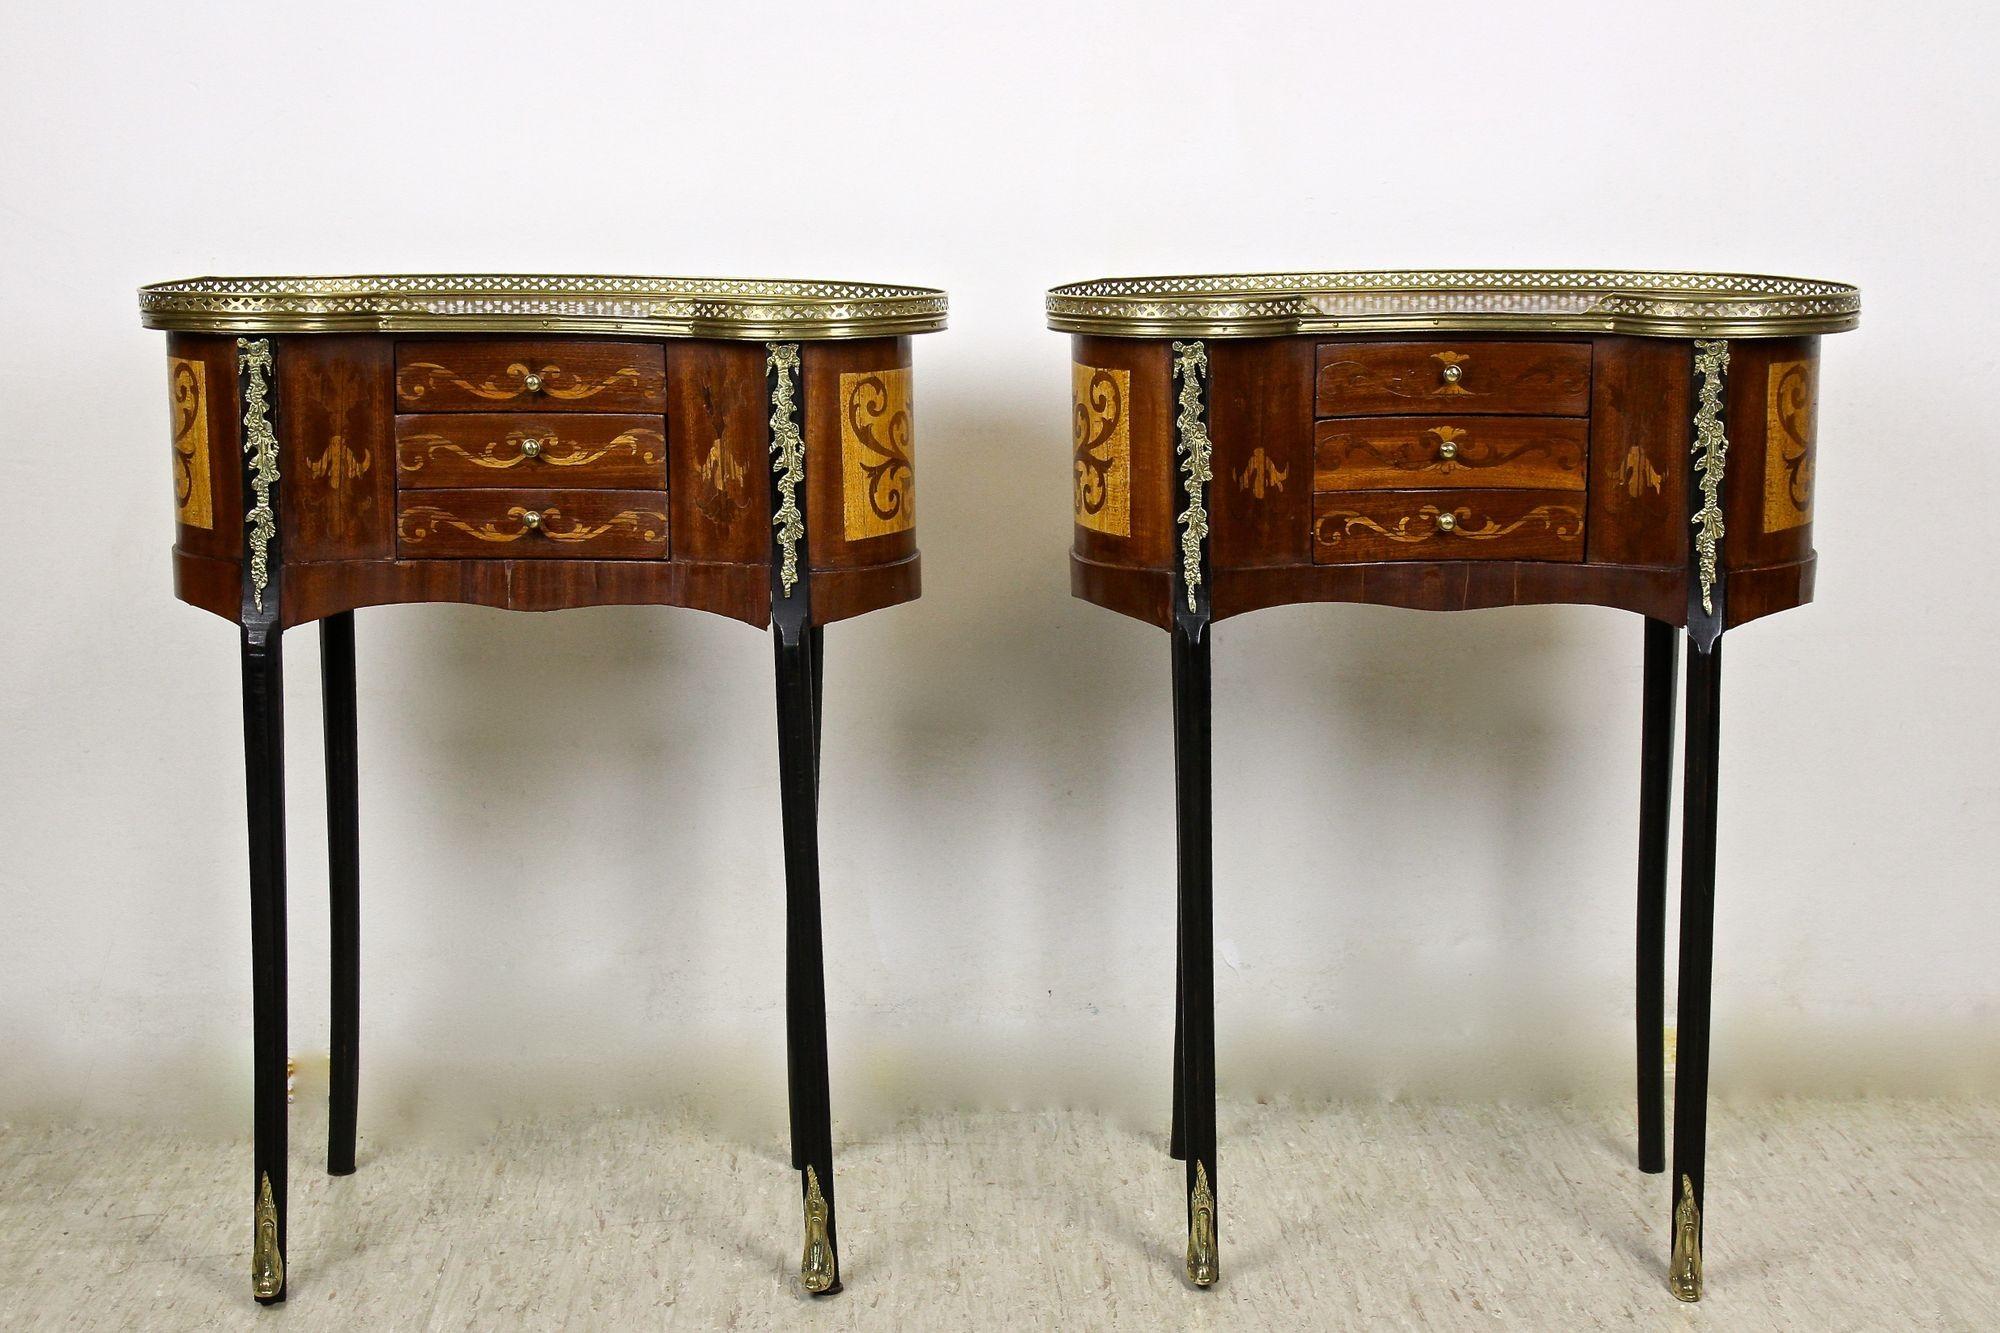 Lovely pair of 19th century French marquetry side tables from the period around 1880. Made of fine mahogany wood, these Louis XVI styled side tables show a very elegant design. The beautiful kidney shaped tables impress with elaborately made